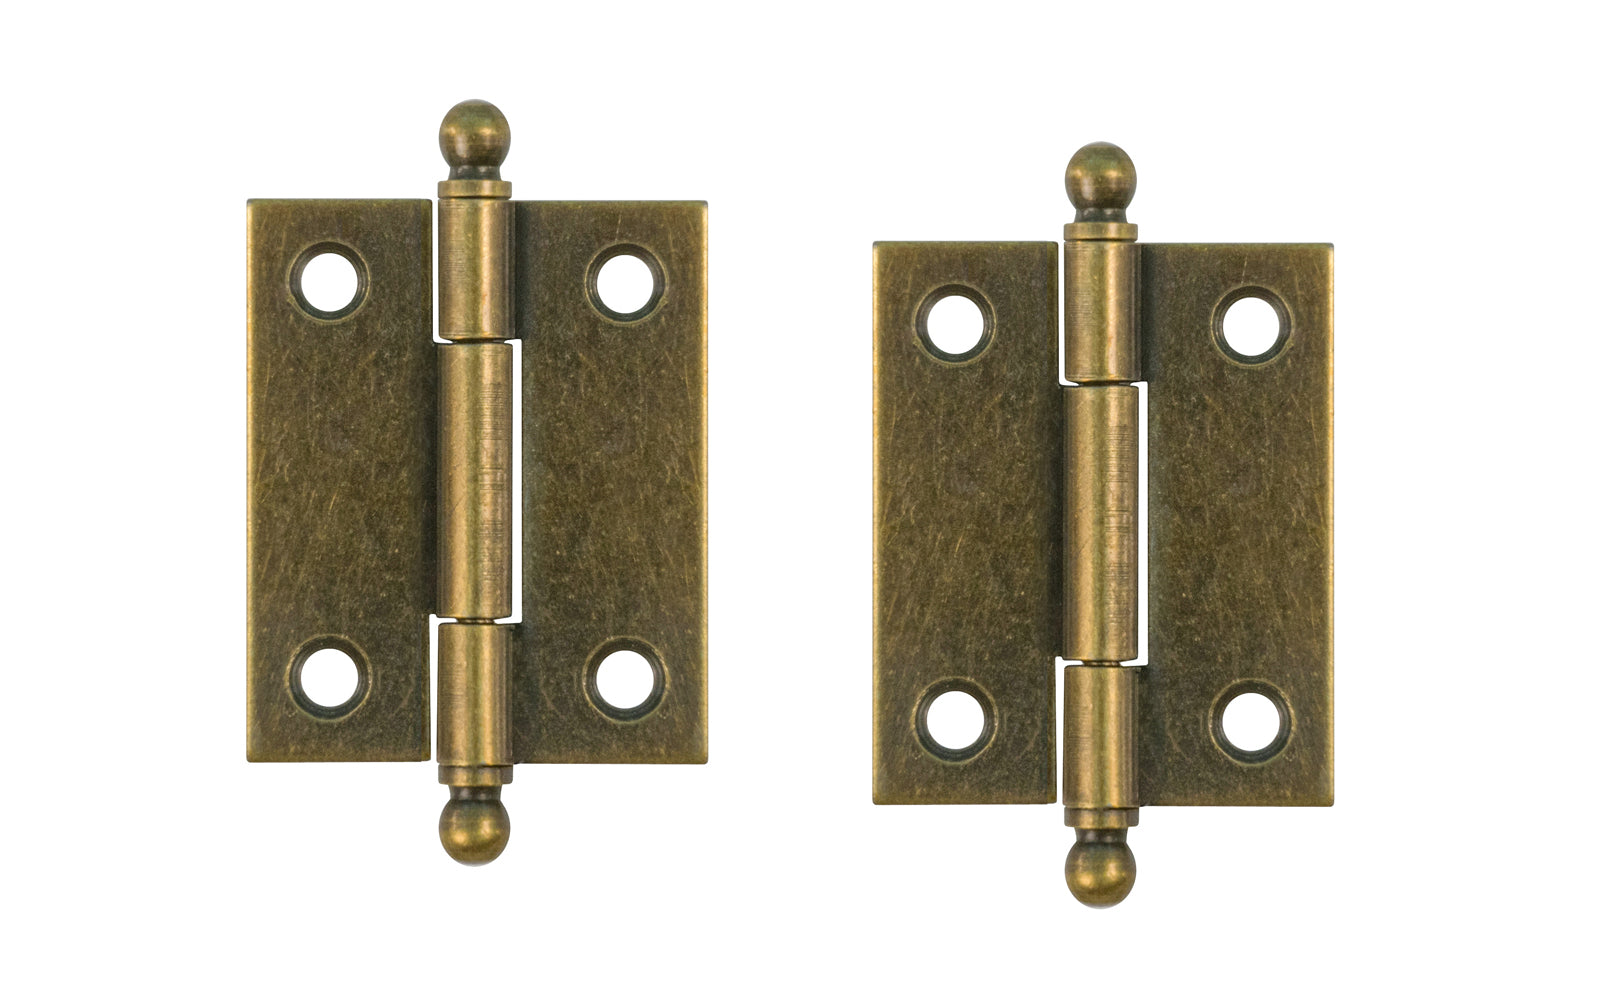 4 Solid Brass Hinge Finial Small Door Box Hinges Vintage Style